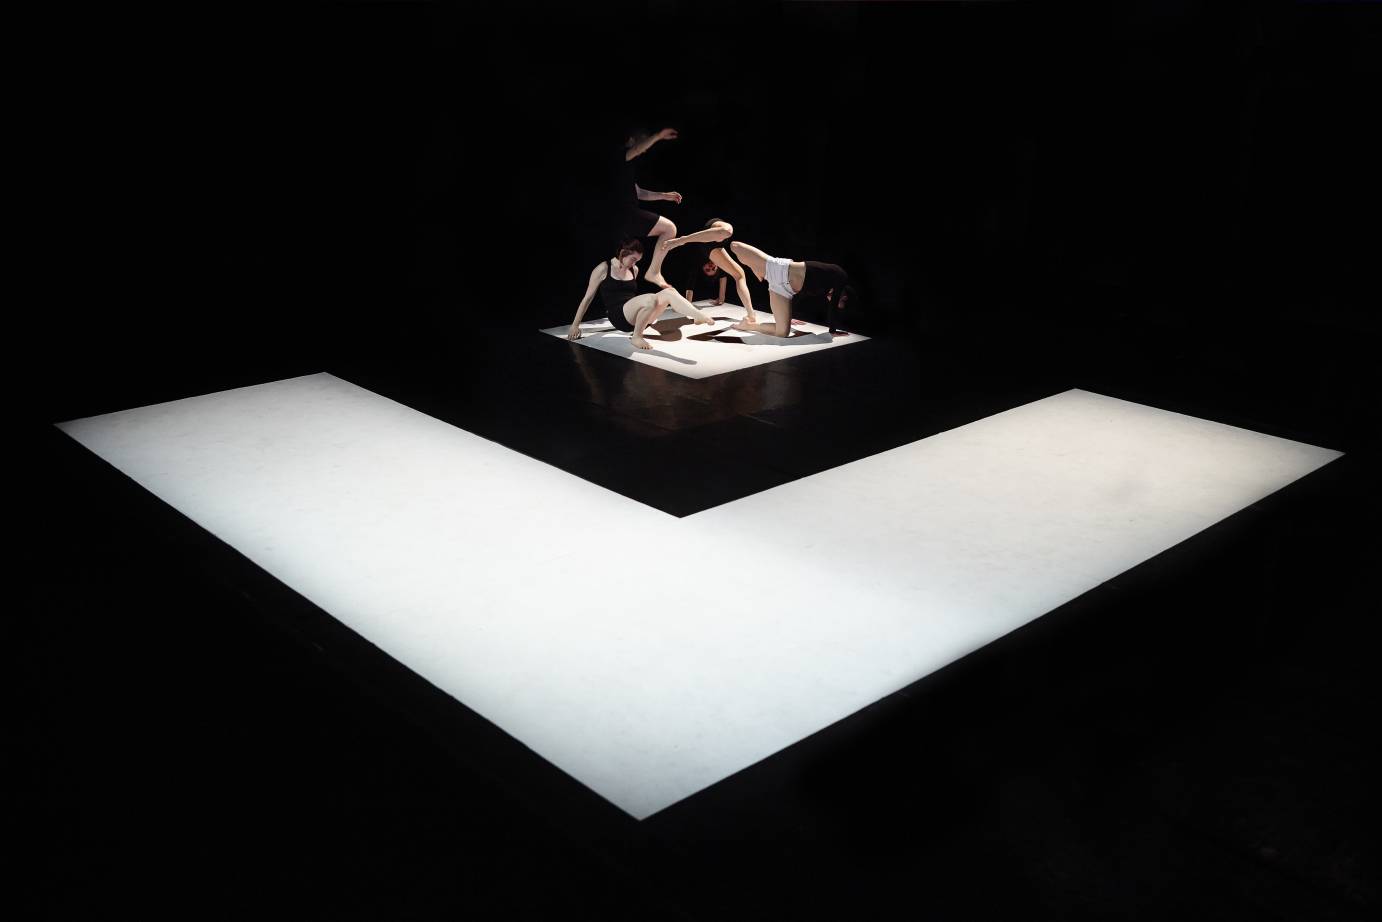 On a floor of a big white square holding a small black one, performers crouch with a leg or arm extended 